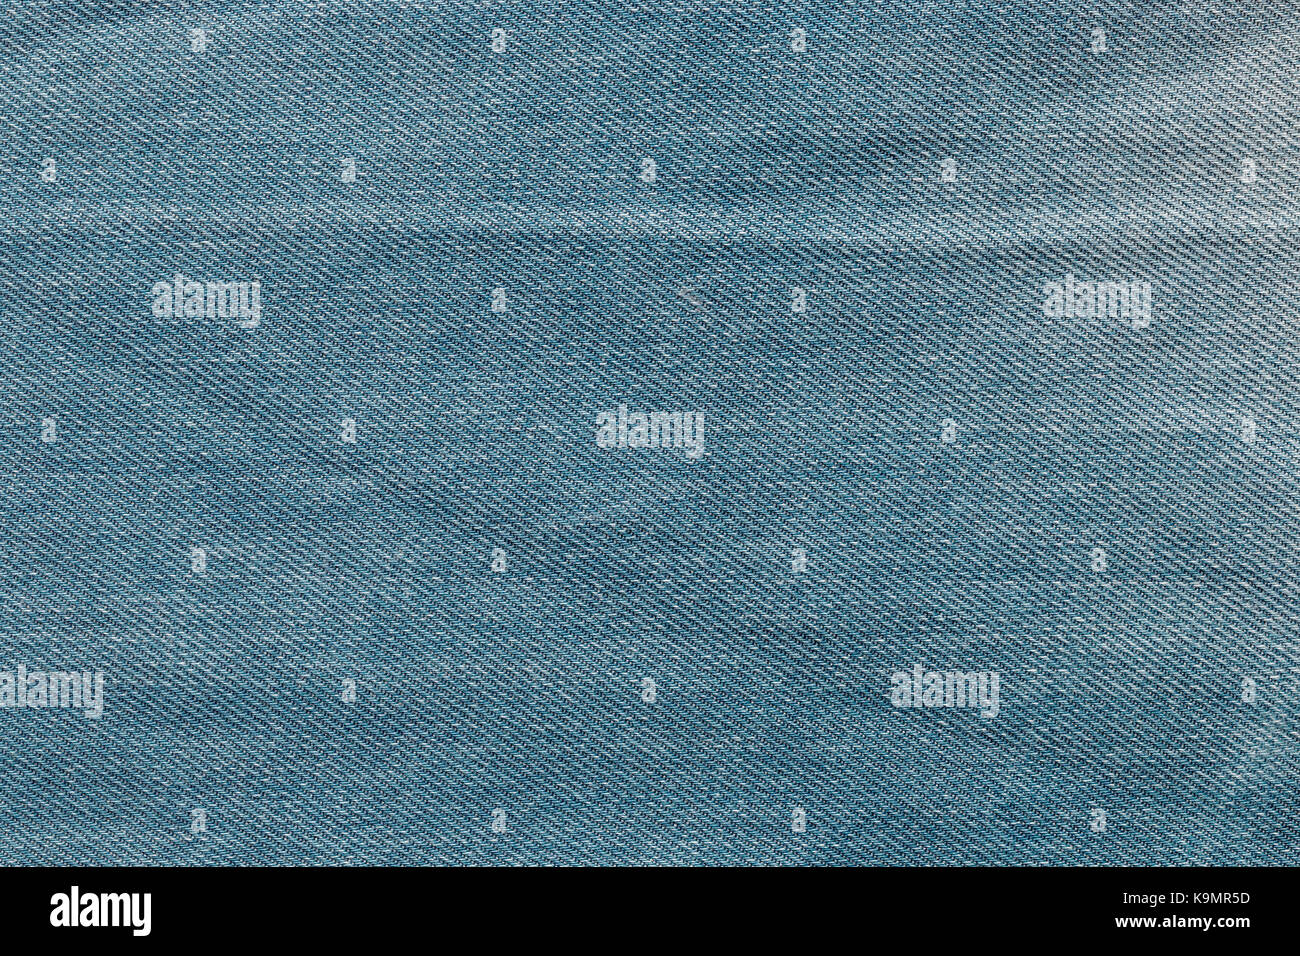 Blue background, denim jeans background, Jeans texture fabric Stock ...